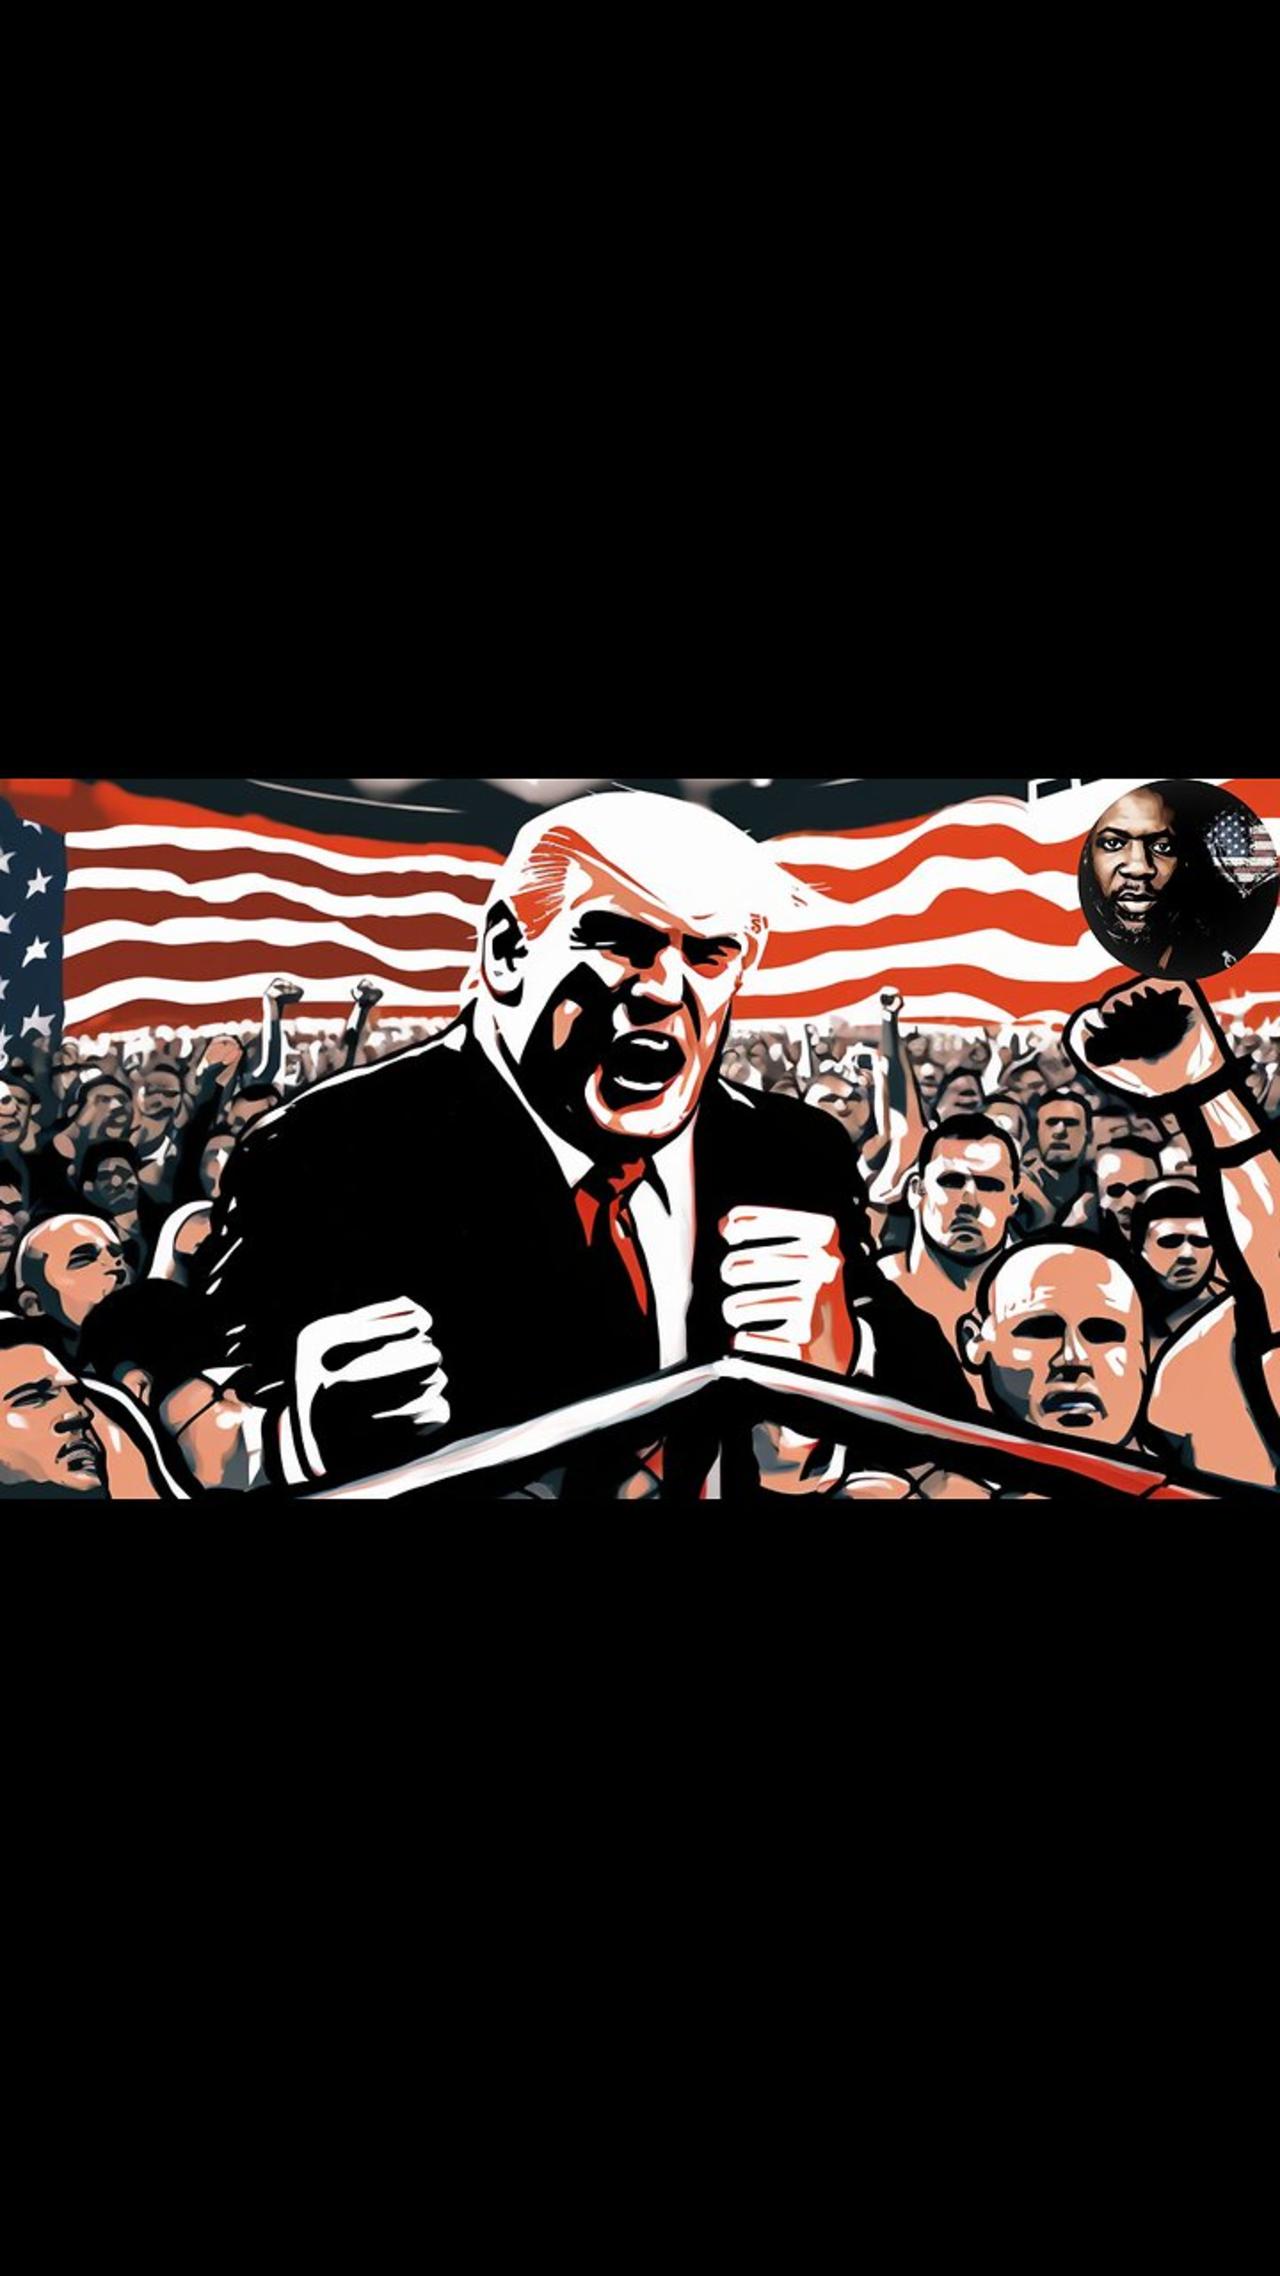 Spice 30 | UFC crowd breaks out in USA chant for Donald Trump